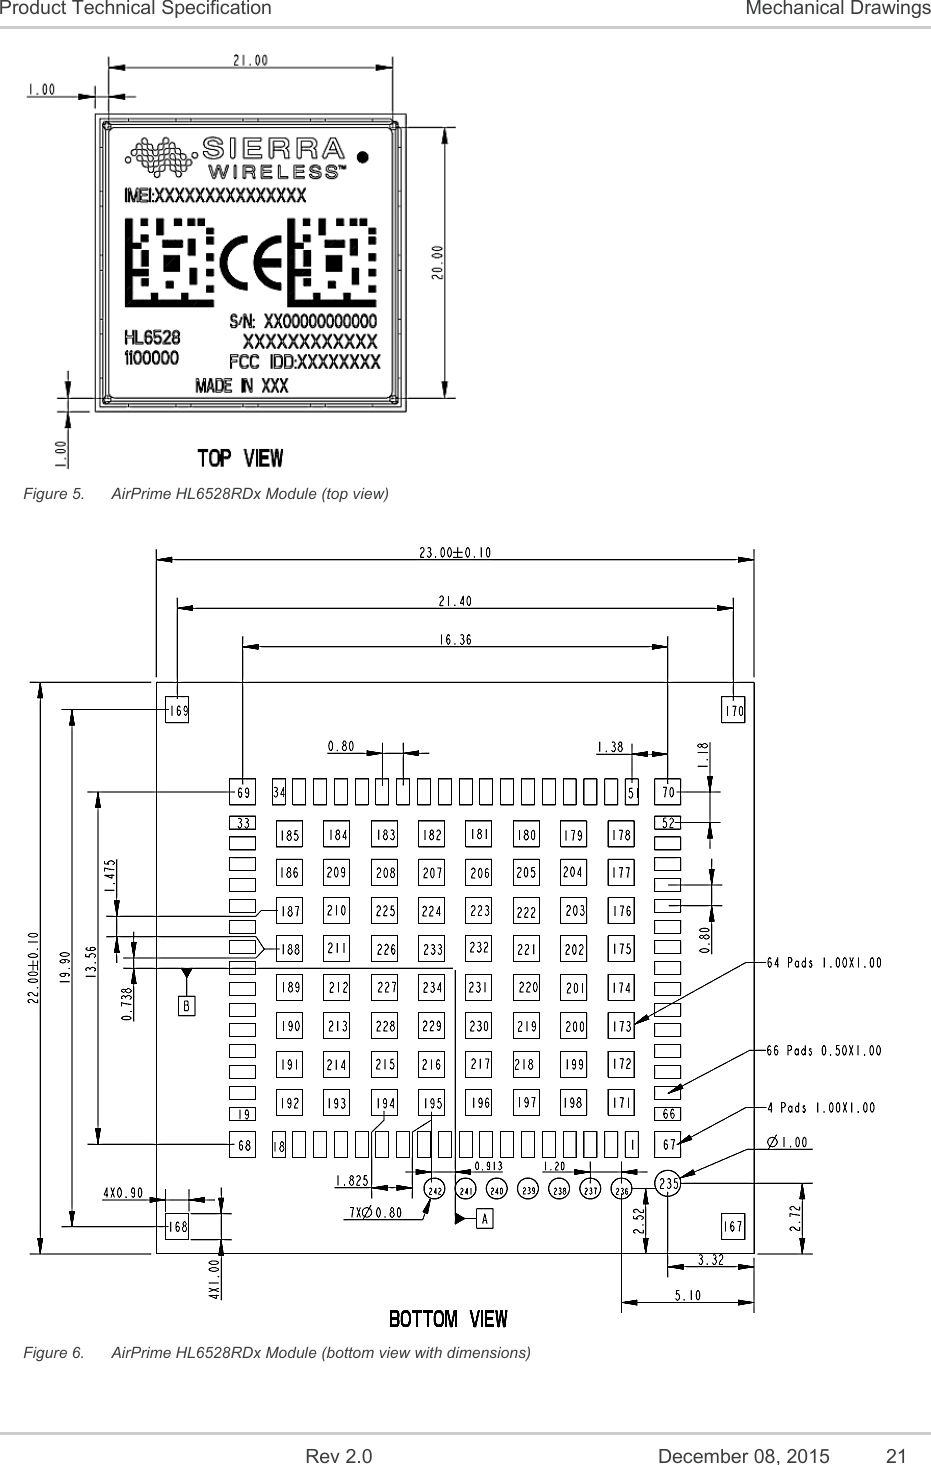    Rev 2.0  December 08, 2015  21 Product Technical Specification  Mechanical Drawings  Figure 5.  AirPrime HL6528RDx Module (top view)  Figure 6.  AirPrime HL6528RDx Module (bottom view with dimensions) 